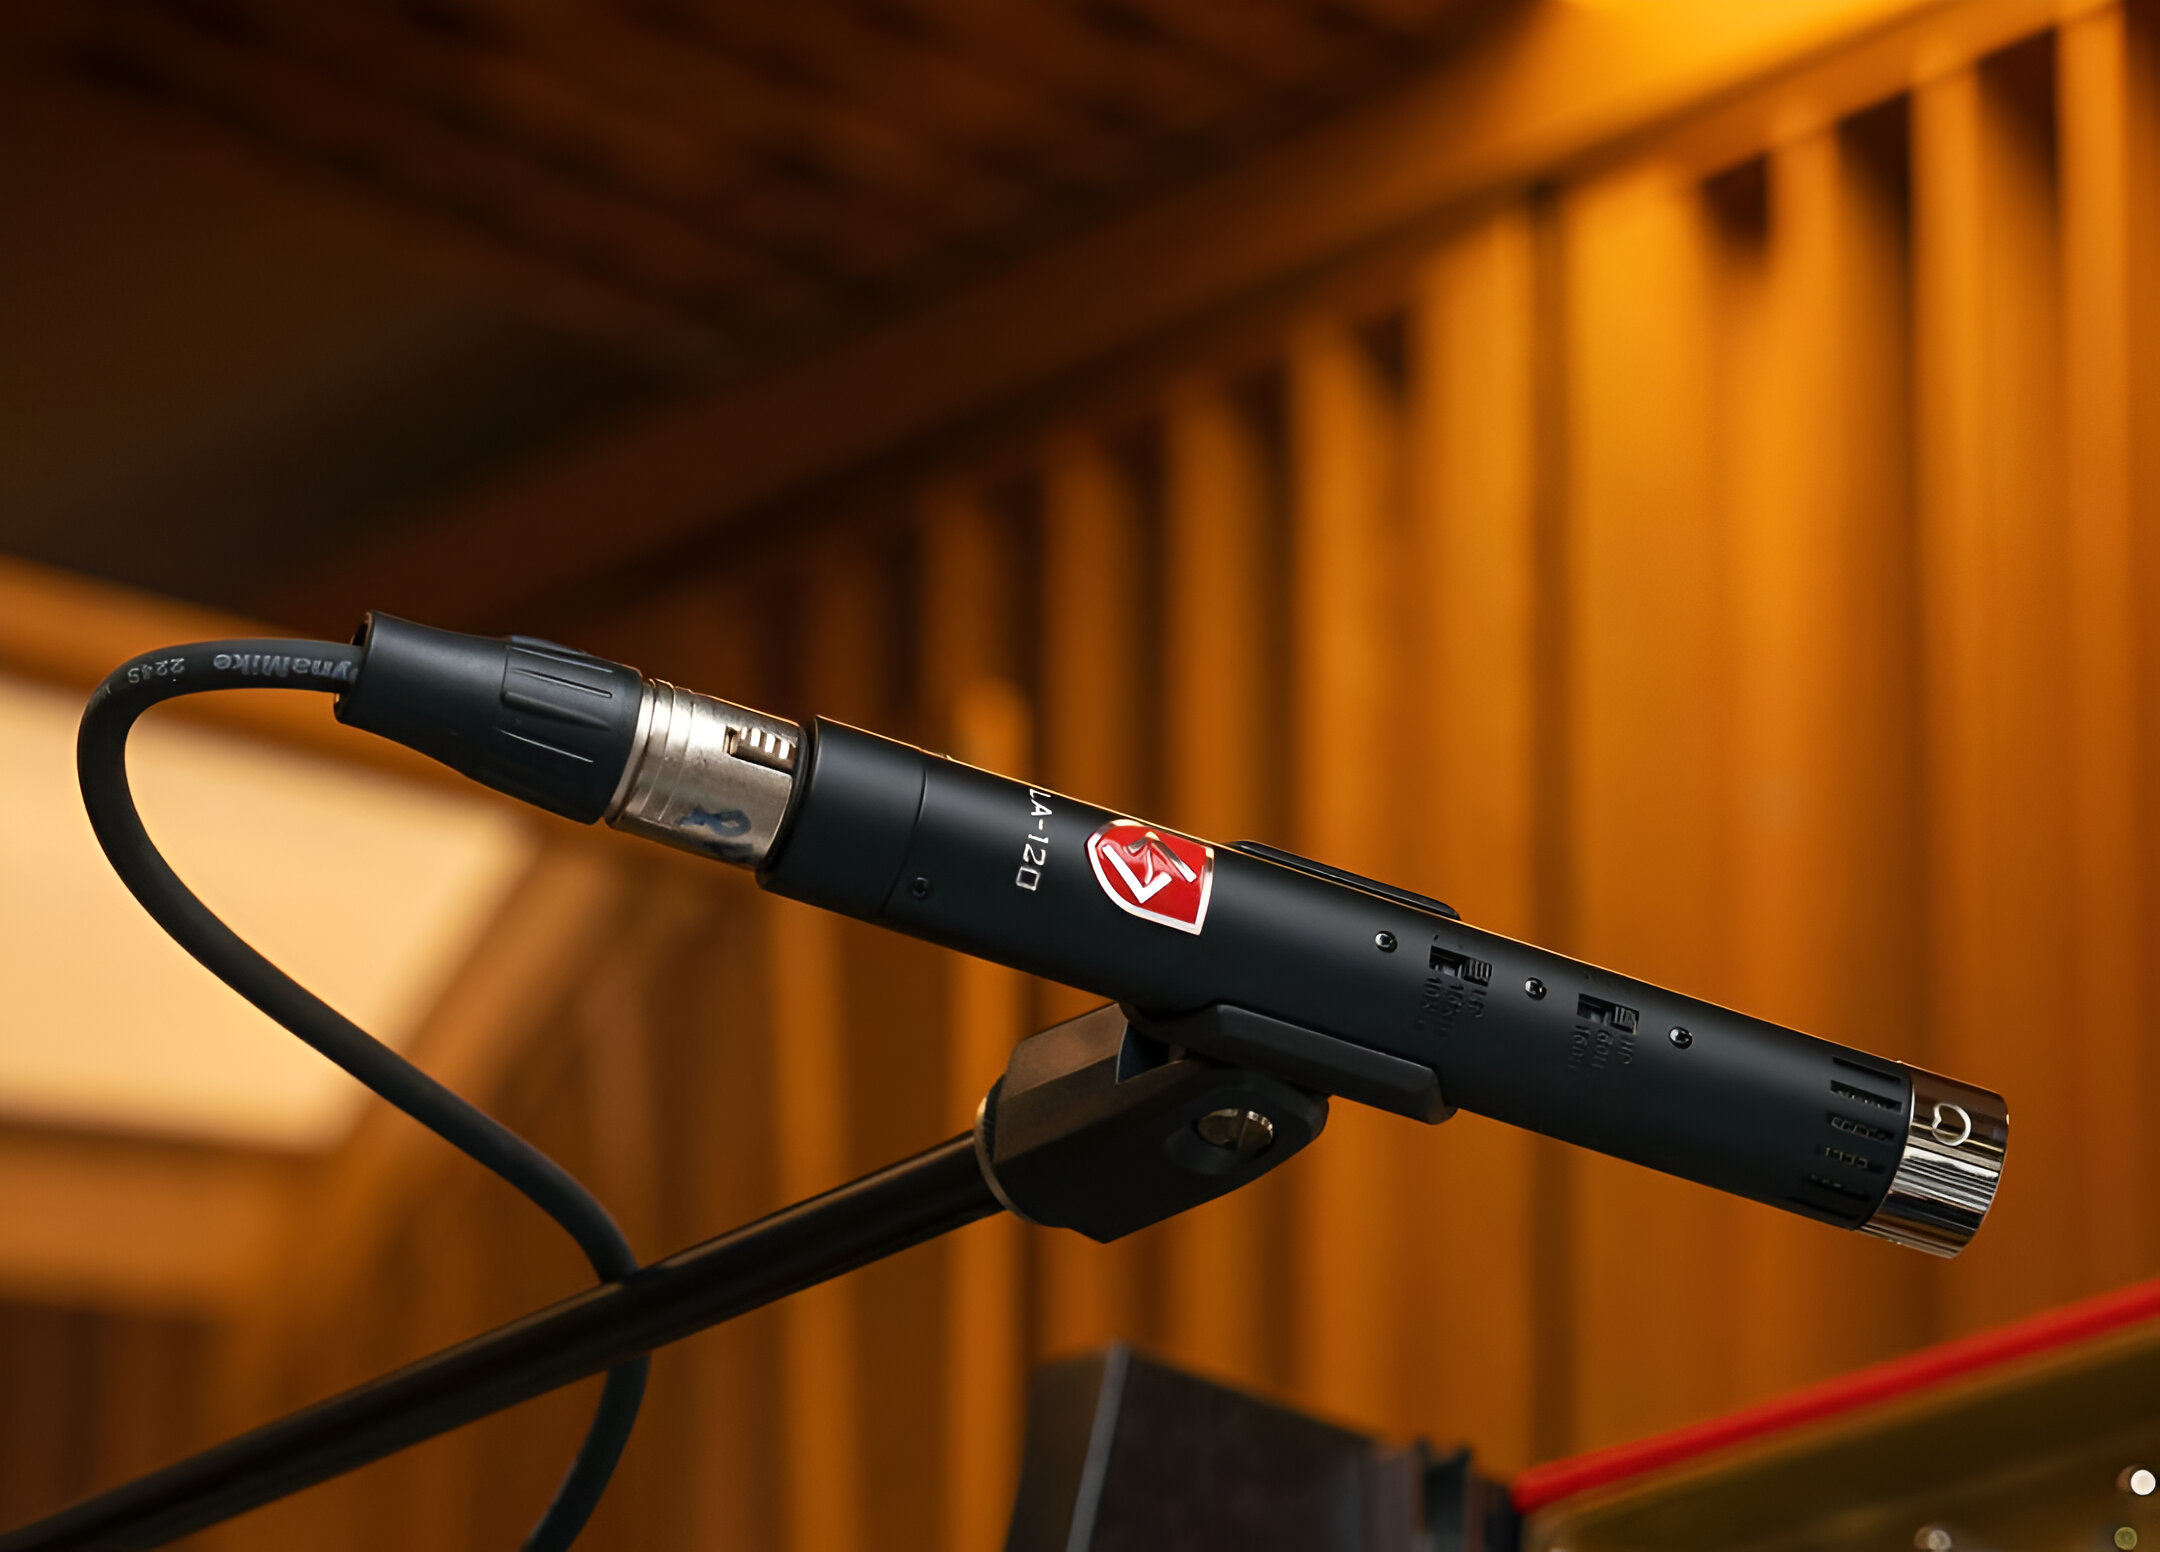 What Are Small Diaphragm Condenser Microphones?